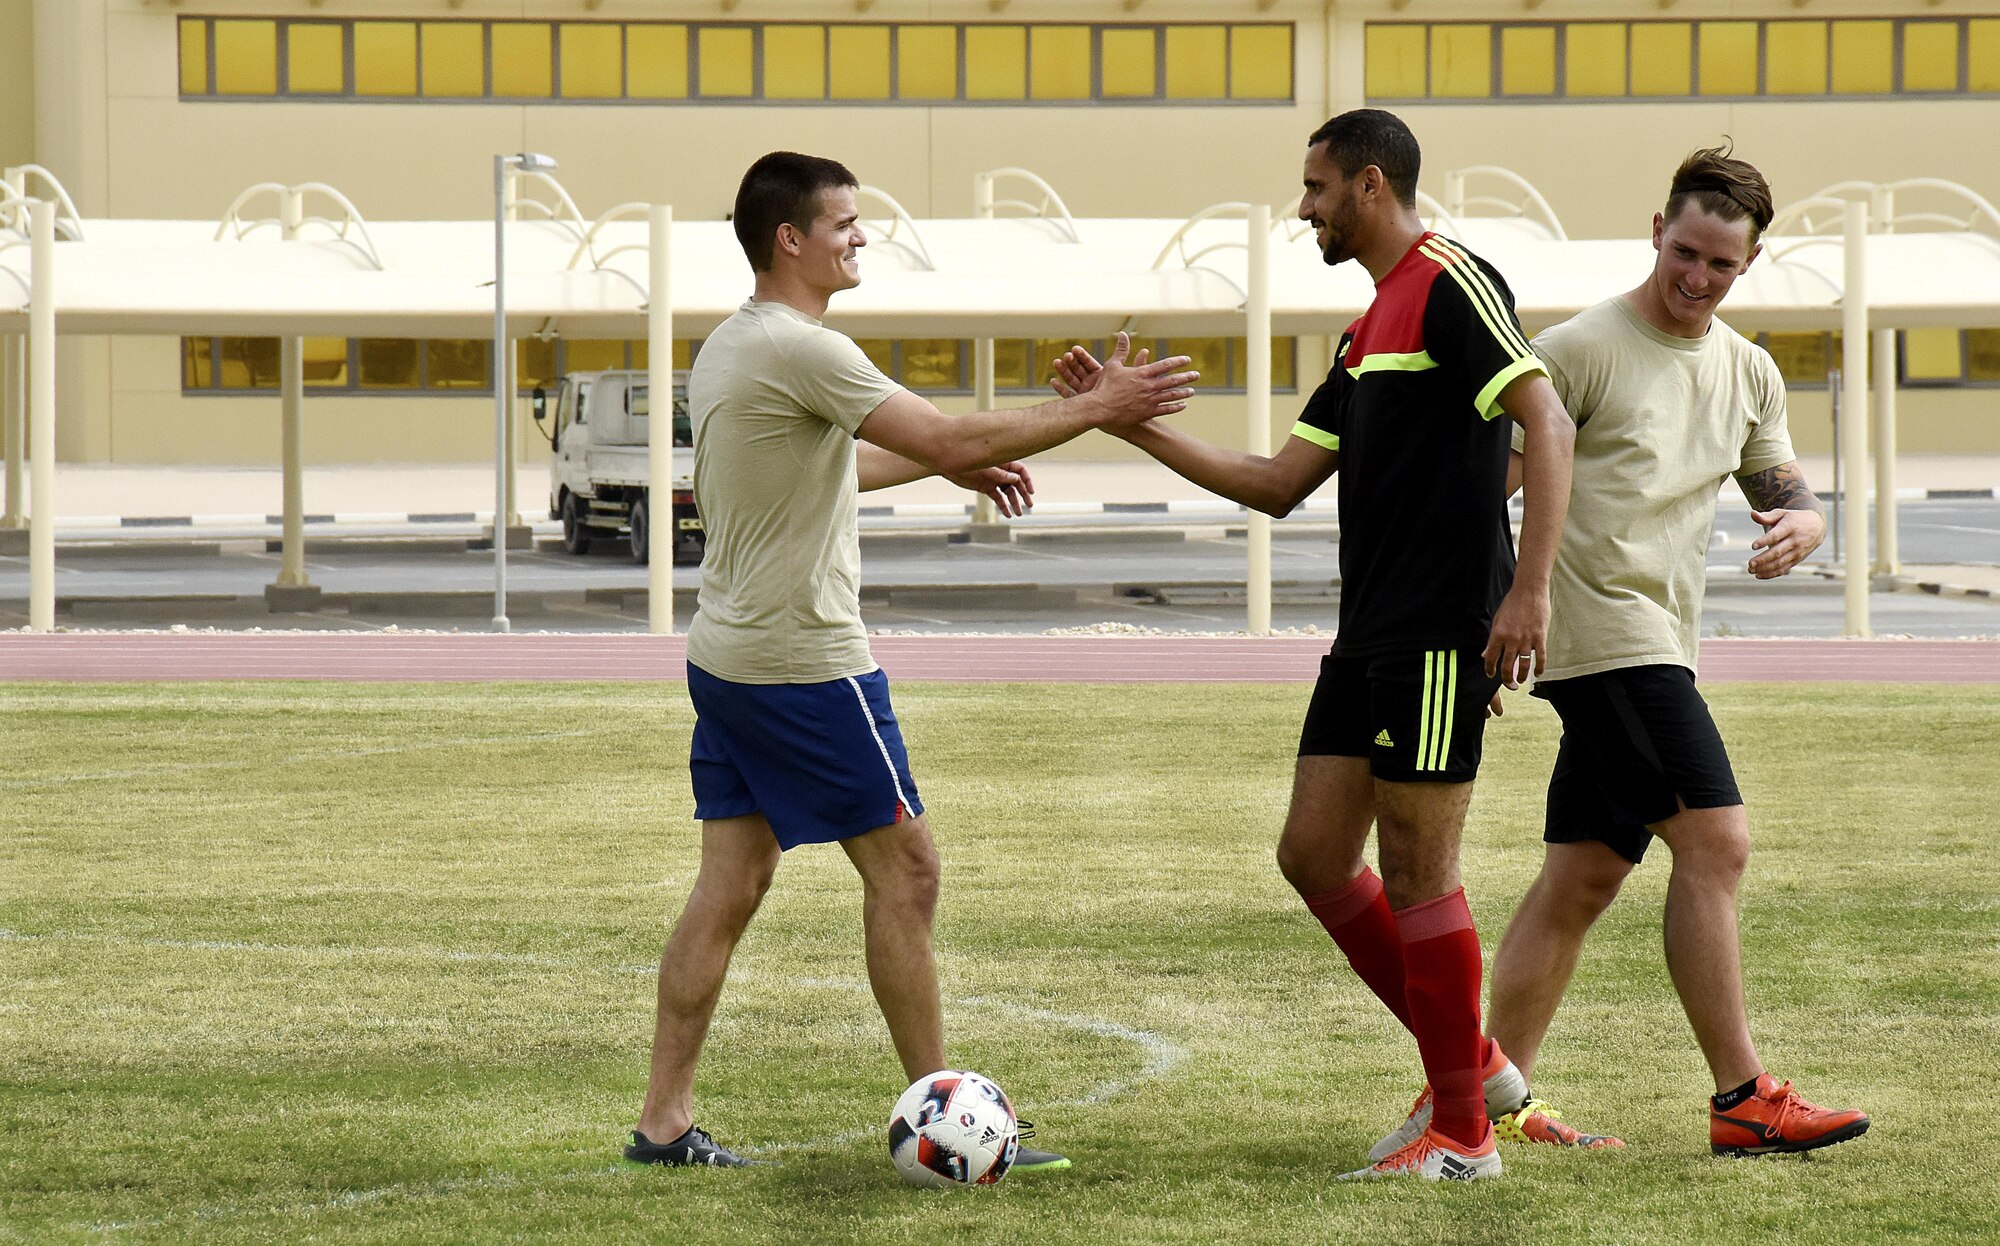 U.S. Air Force Airmen with the 379th Expeditionary Security Forces Squadron shake hands with Qatar Emiri Air Force Security Forces members after a soccer game at Al Udeid Air Base, Qatar, March 23, 2017. The Airmen who participated in the game and those who went to support their team had the chance to interact with their host nation counterparts during the friendly match. (U.S. Air Force photo by Senior Airman Cynthia A. Innocenti)